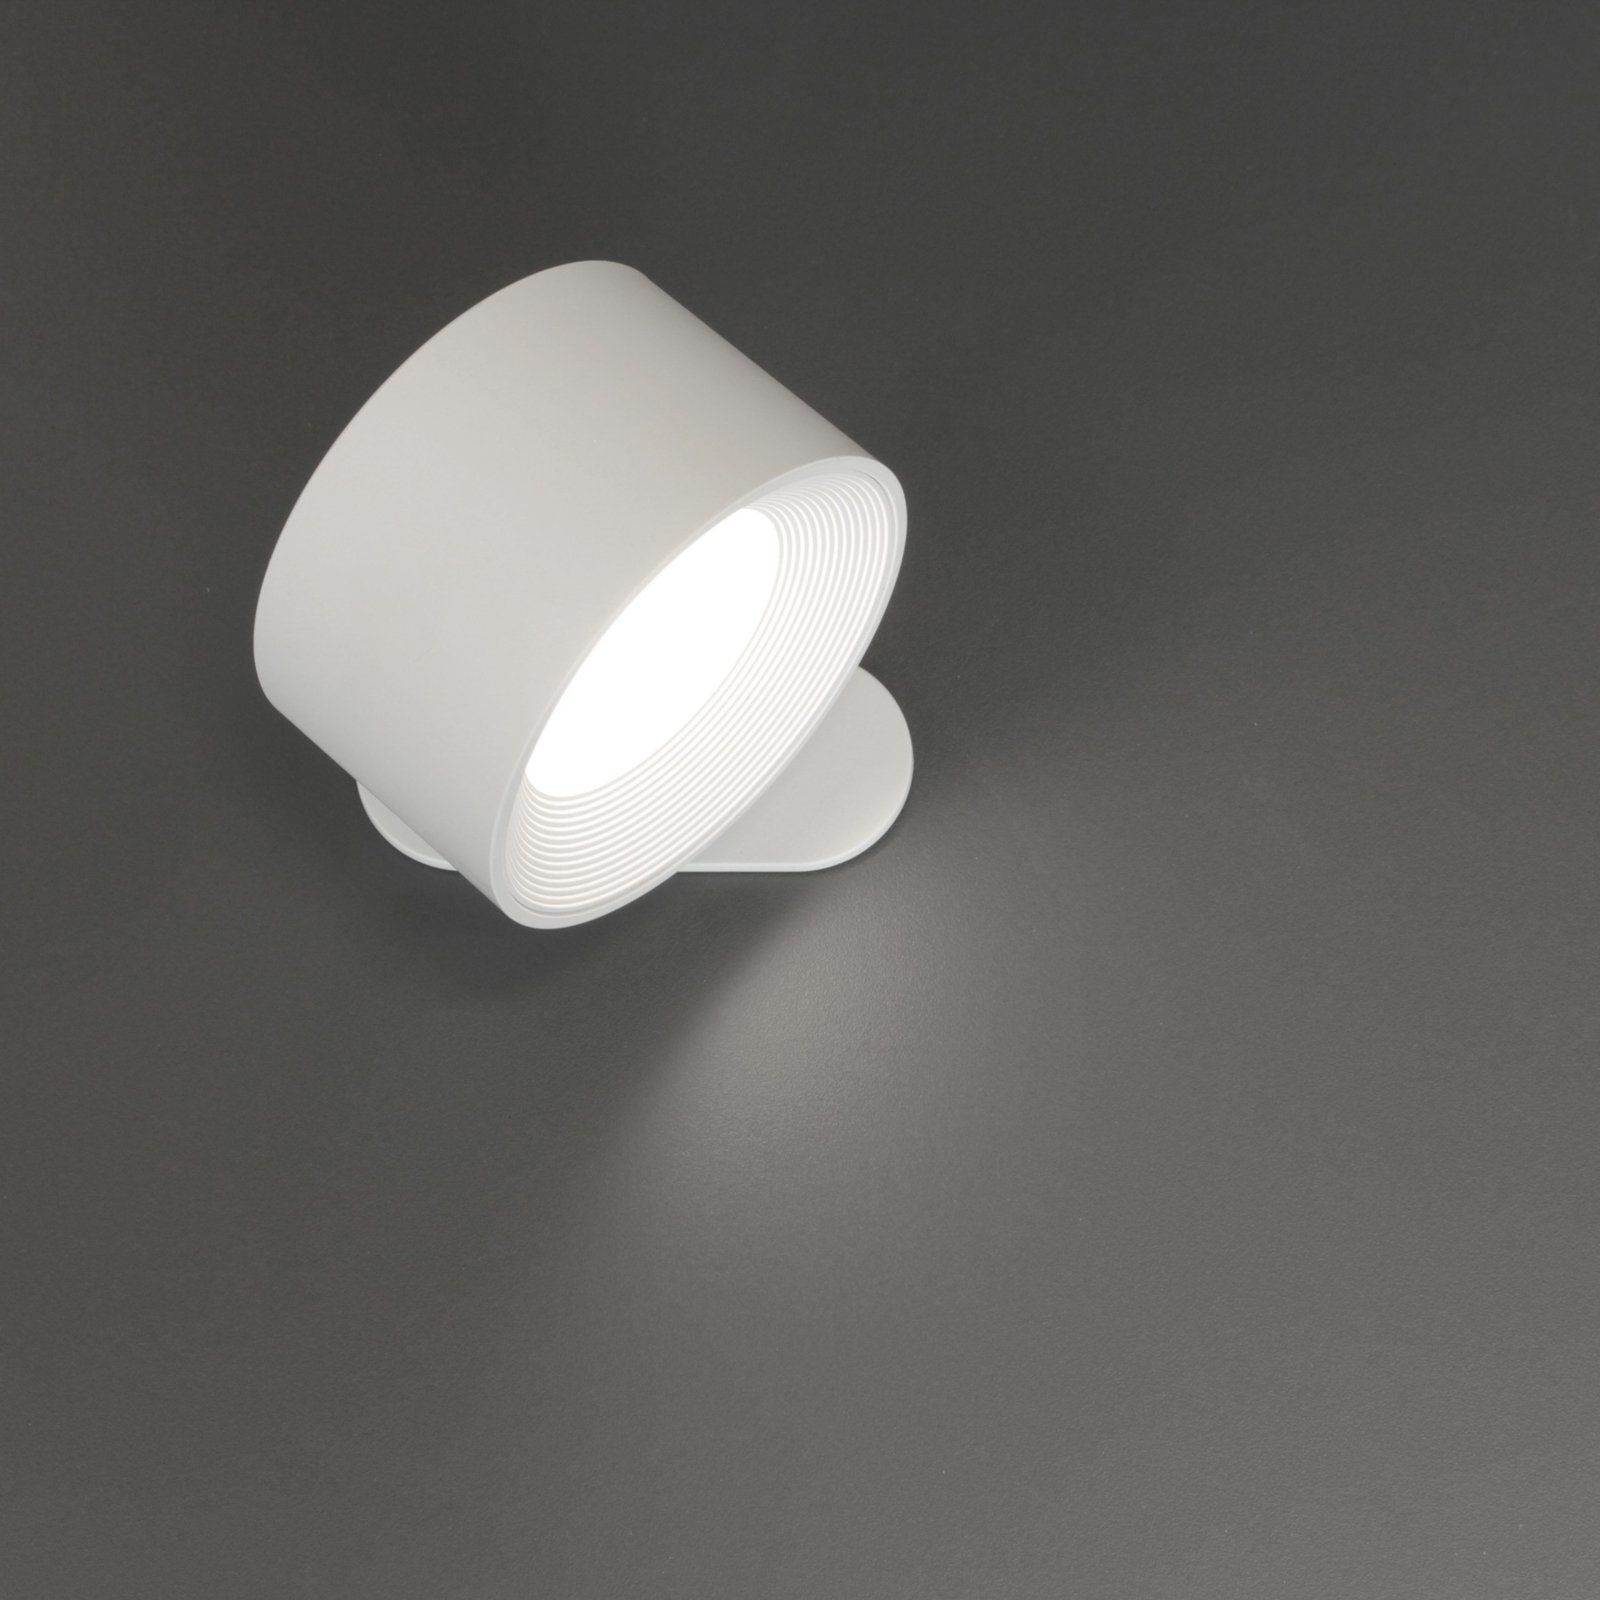 LED wall light Magnetics, white, CCT, with magnet